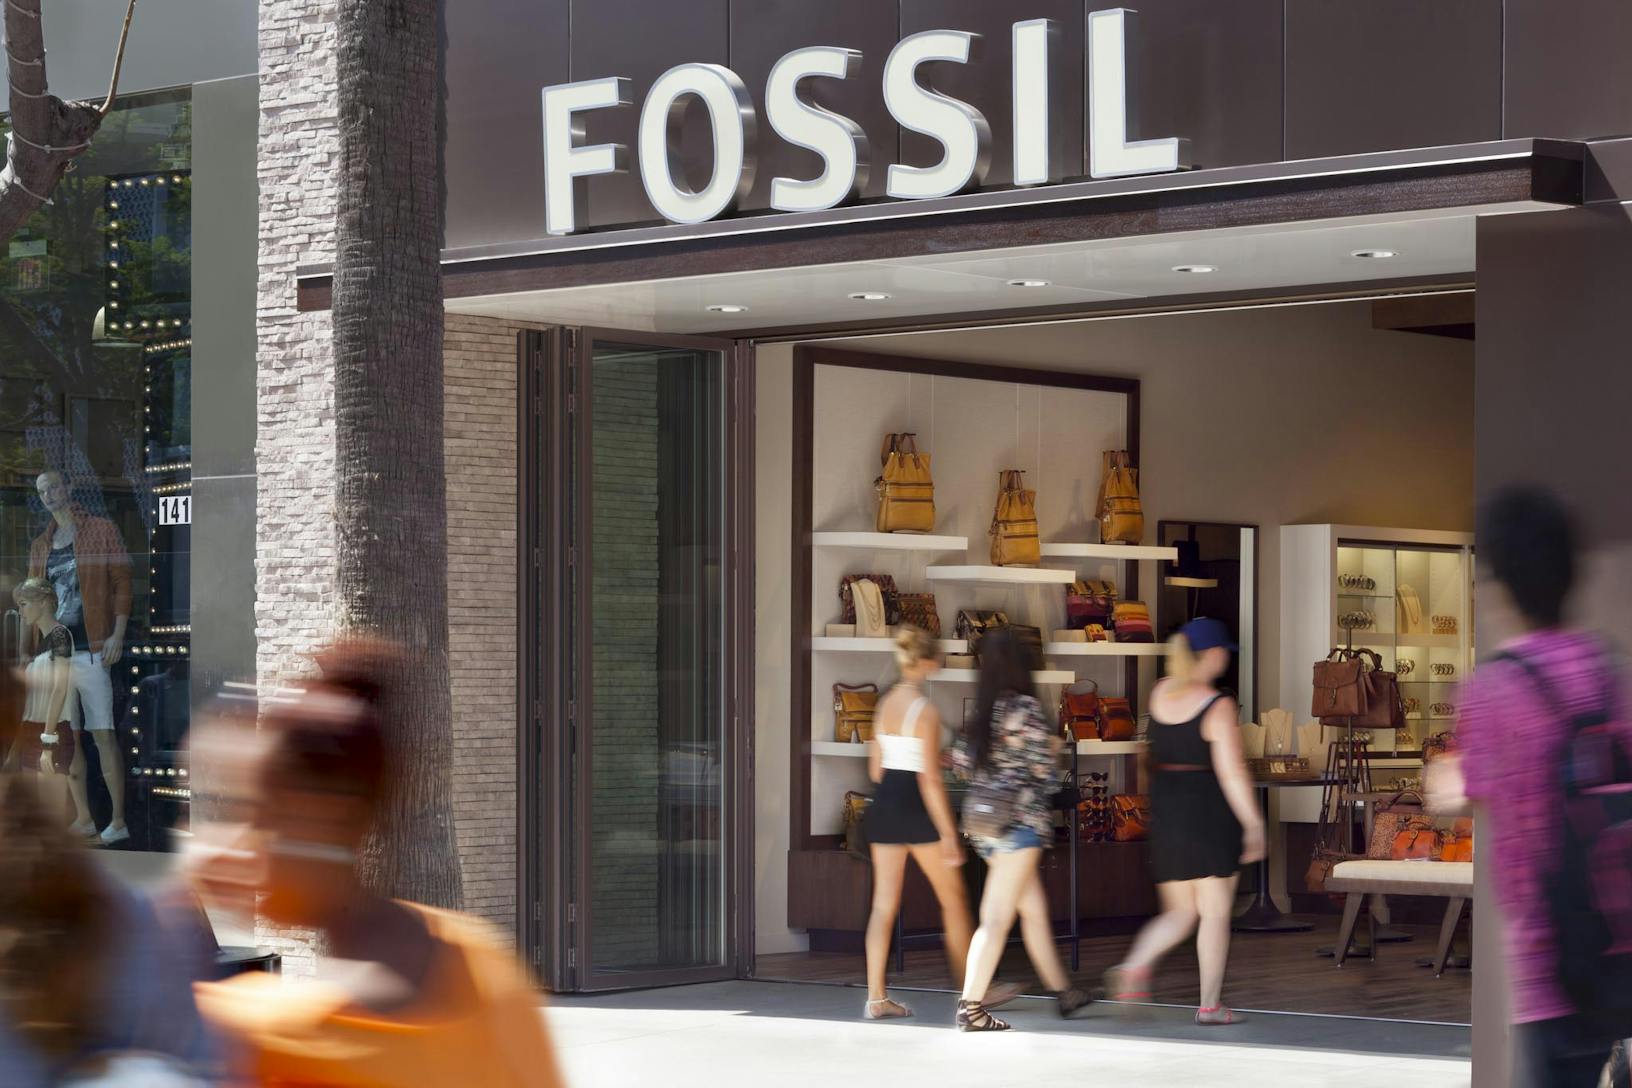 SL70 Retail Folding Entry Doors at the Fossil Store in Santa Monica, CA - Opened Exterior Day View